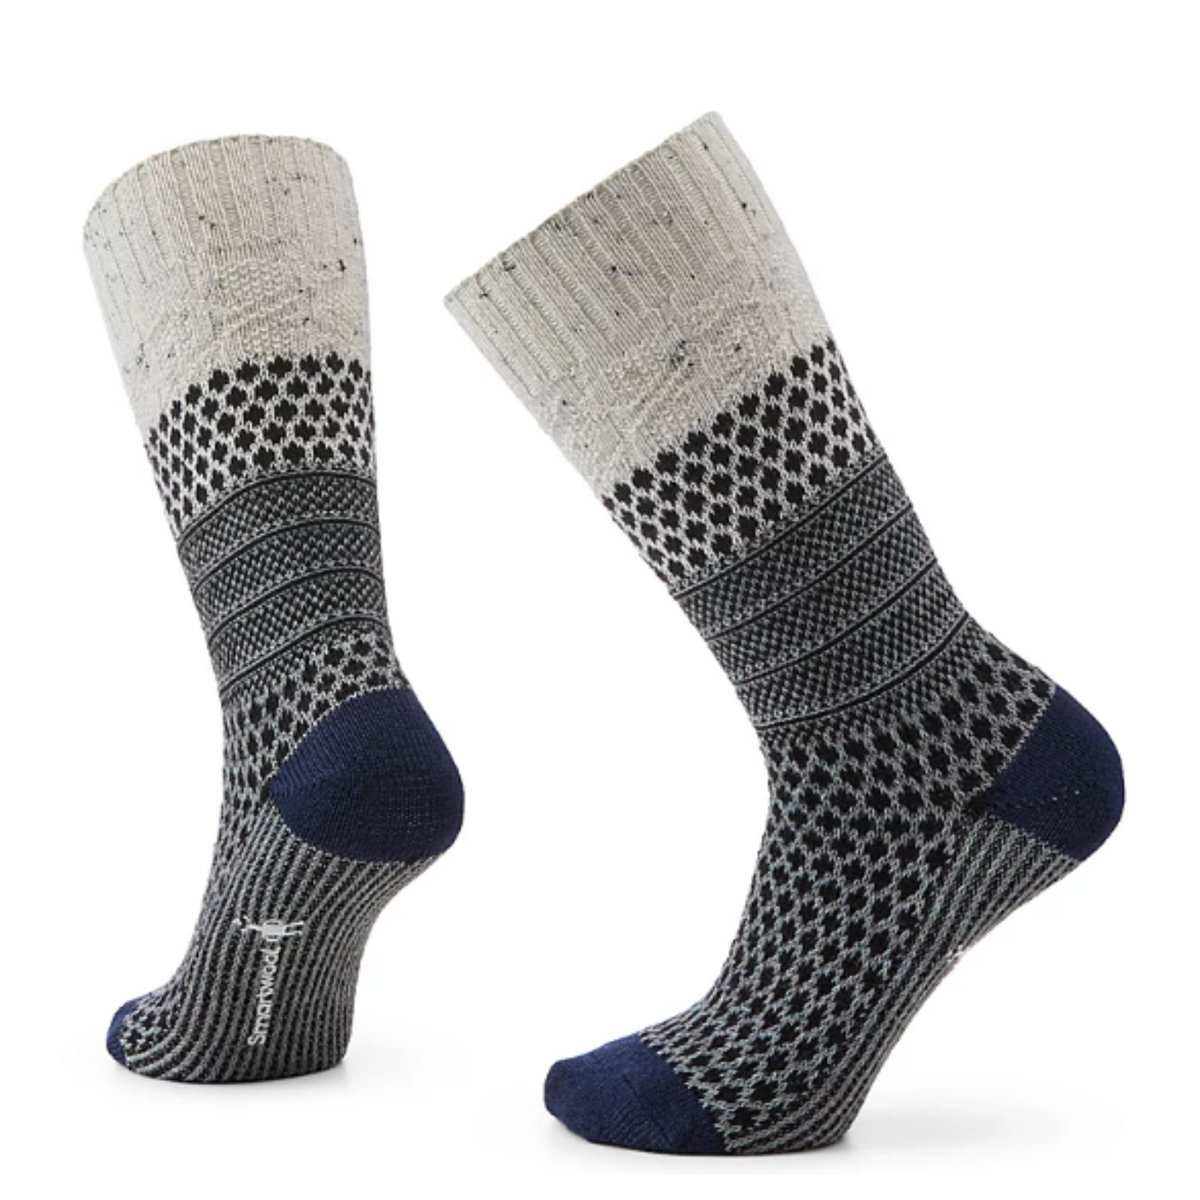 Smartwool Popcorn Cable Crew women&#39;s sock featuring heather gray colored cuff, and multiple shades of gray and black pattern on rest of sock, black toe and heel. Socks on display feet. 